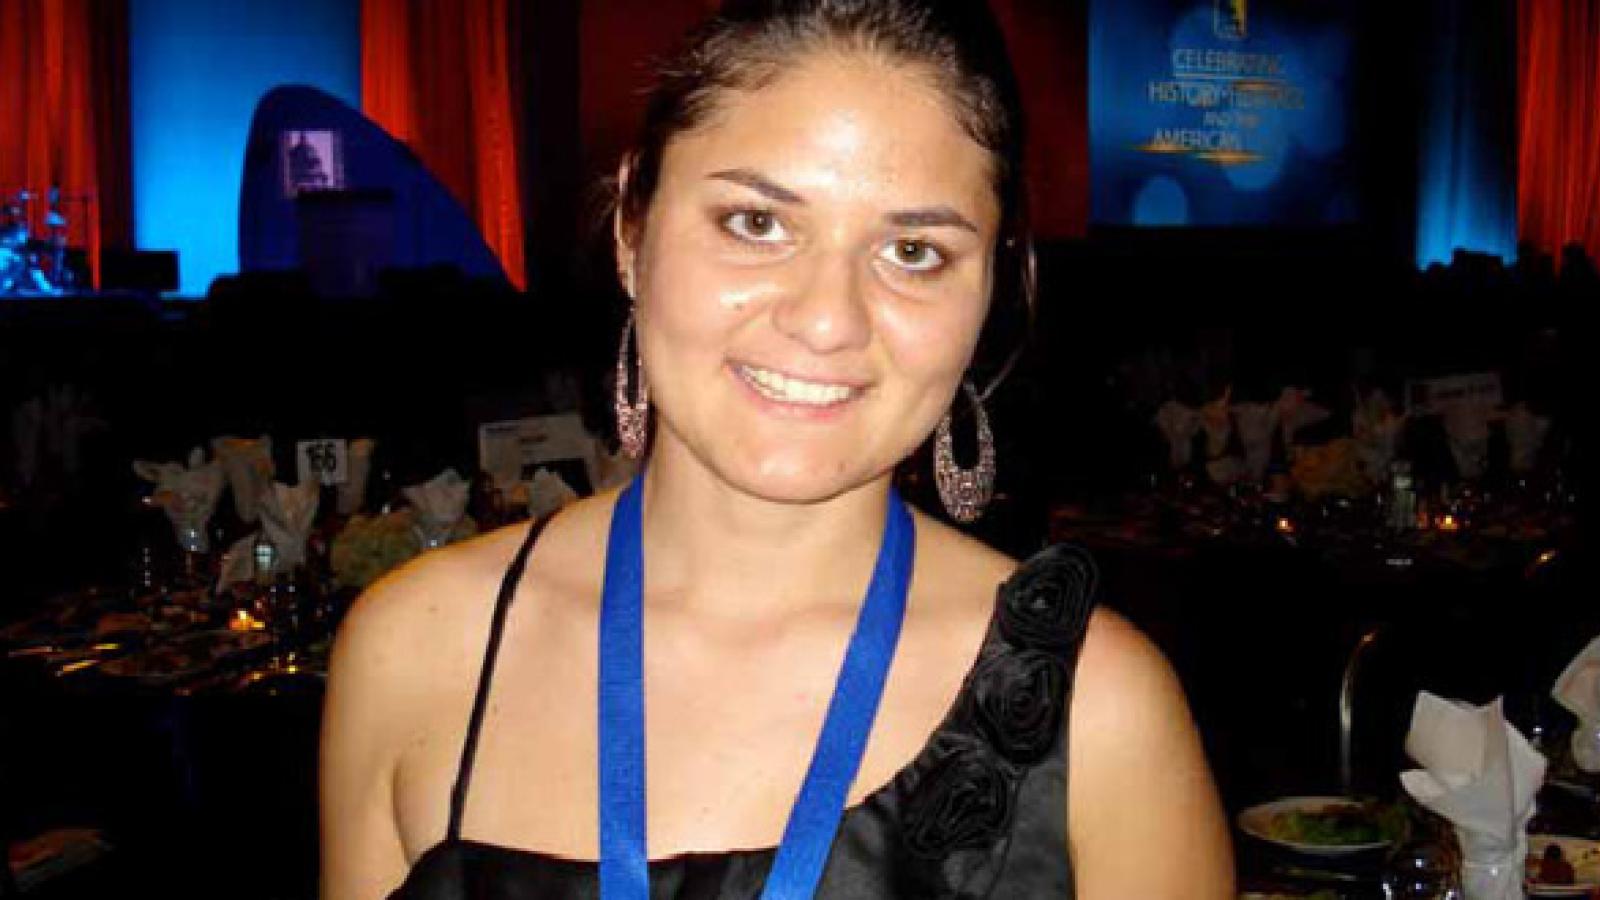 Carmen Flores-Carrion interned at the Mexican Consulate in Miami, Florida.